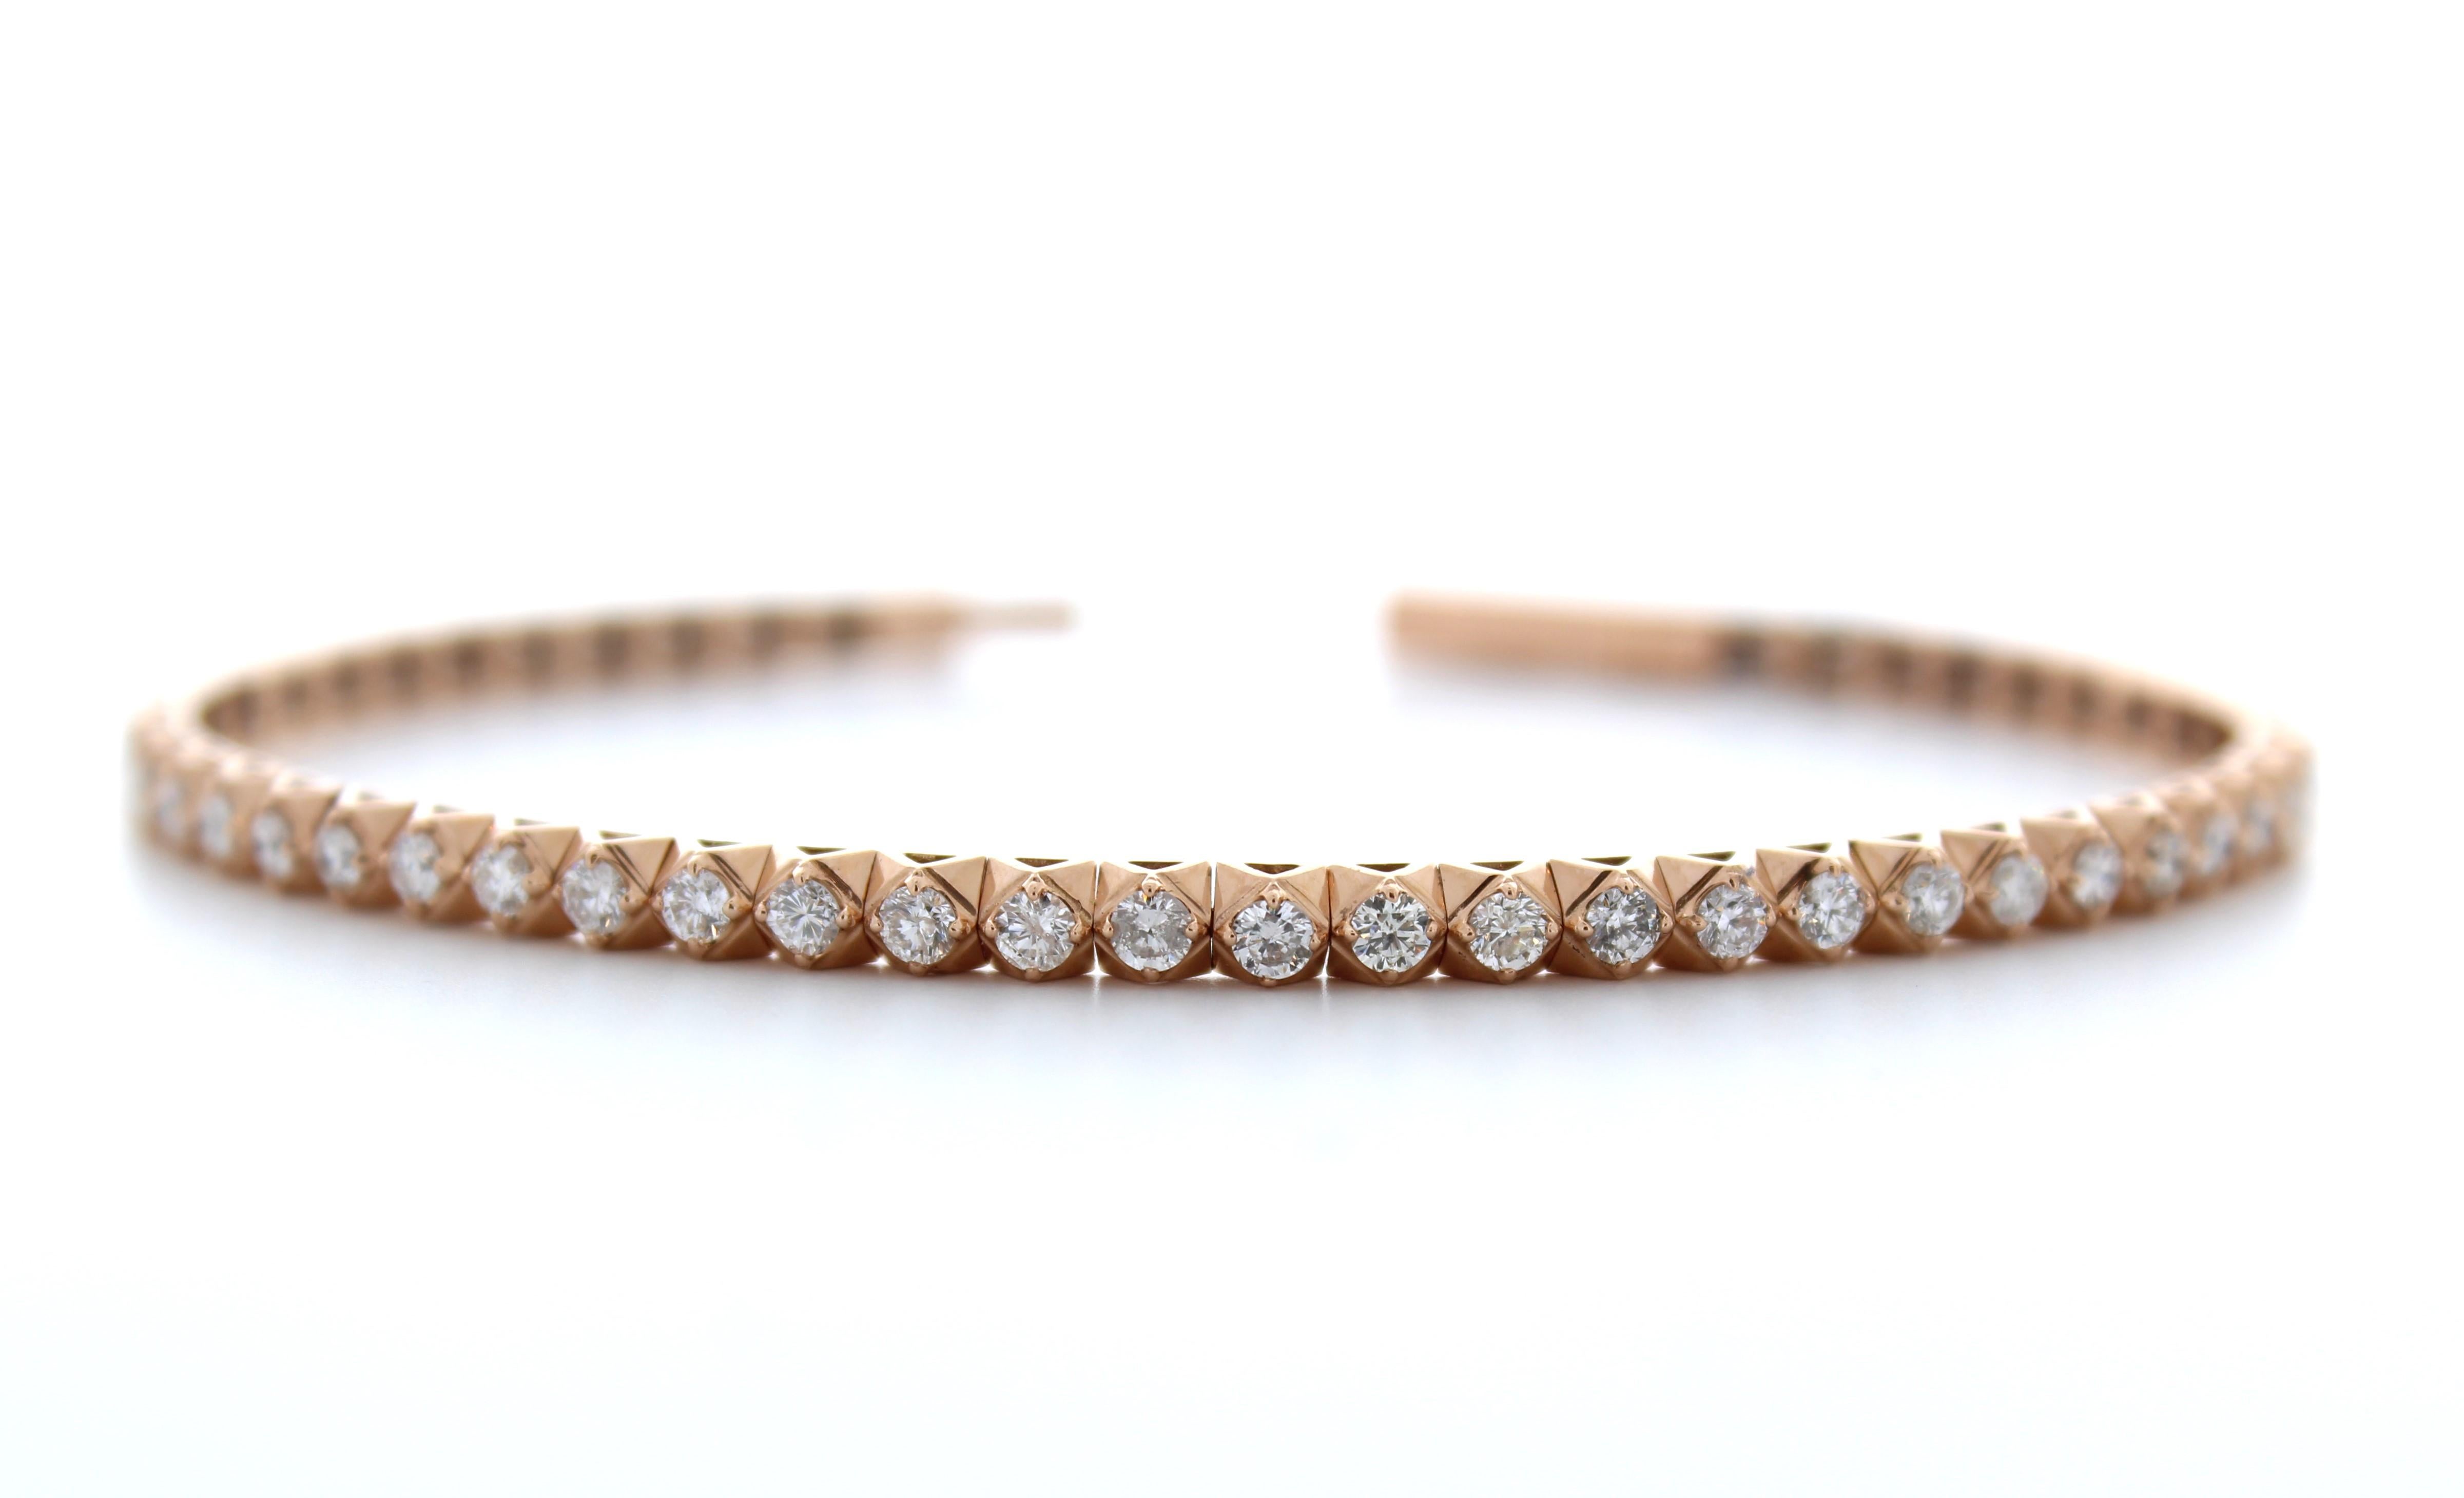 The 2.00 carat total weight fashion bracelet with 52 round diamonds in 14k rose gold is a stunning and elegant piece of jewelry that will add a touch of luxury to any outfit. The bracelet features 52 round diamonds with a total weight of 2.00